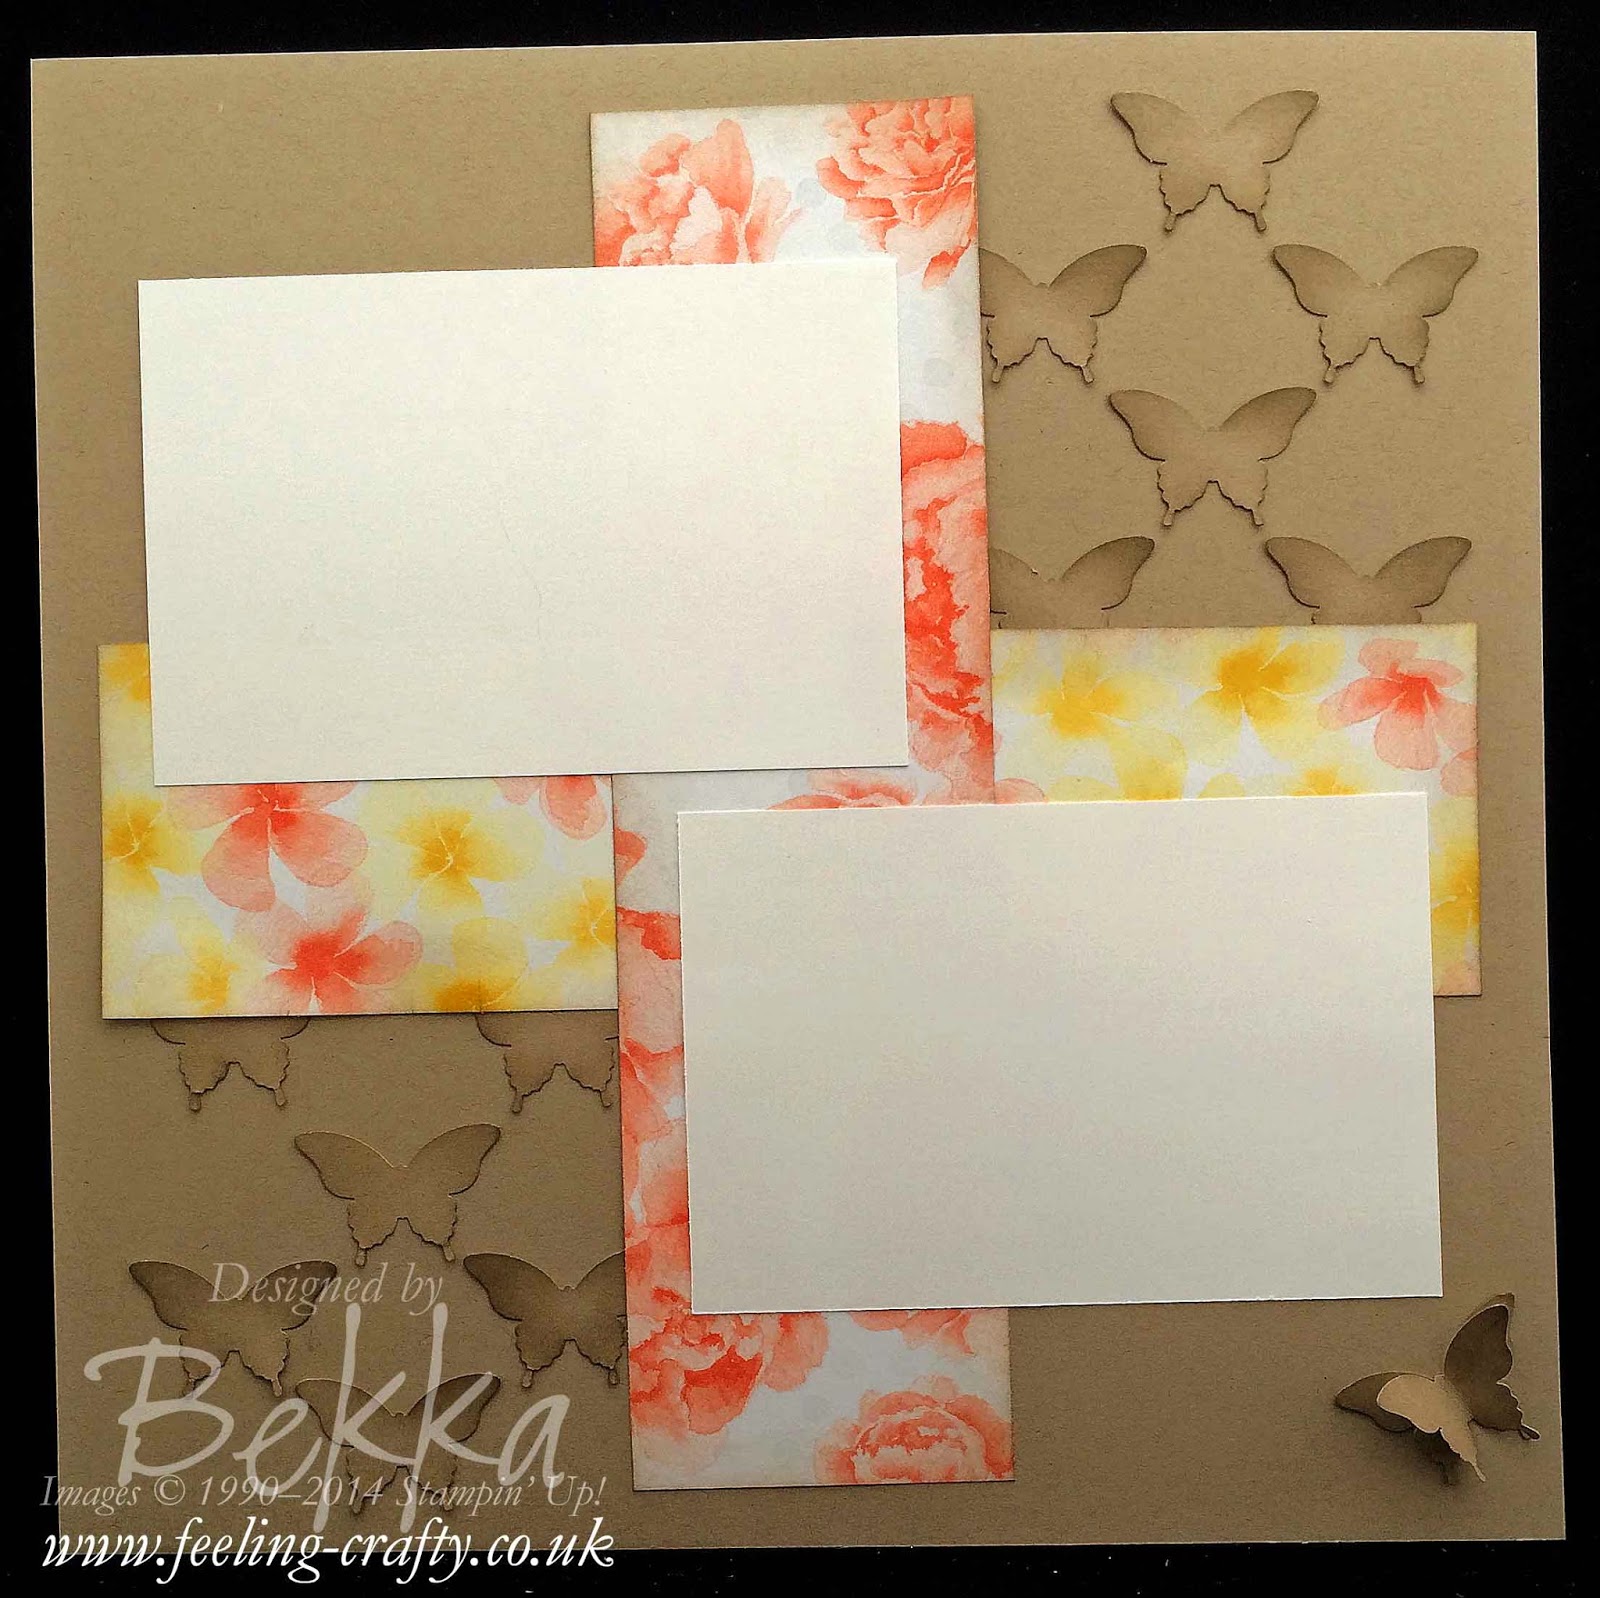 Beautiful Butterfly Scrapbook Page by UK based Stampin' Up! Demonstrator Bekka - check her blog every Saturday for Scrapbook Ideas